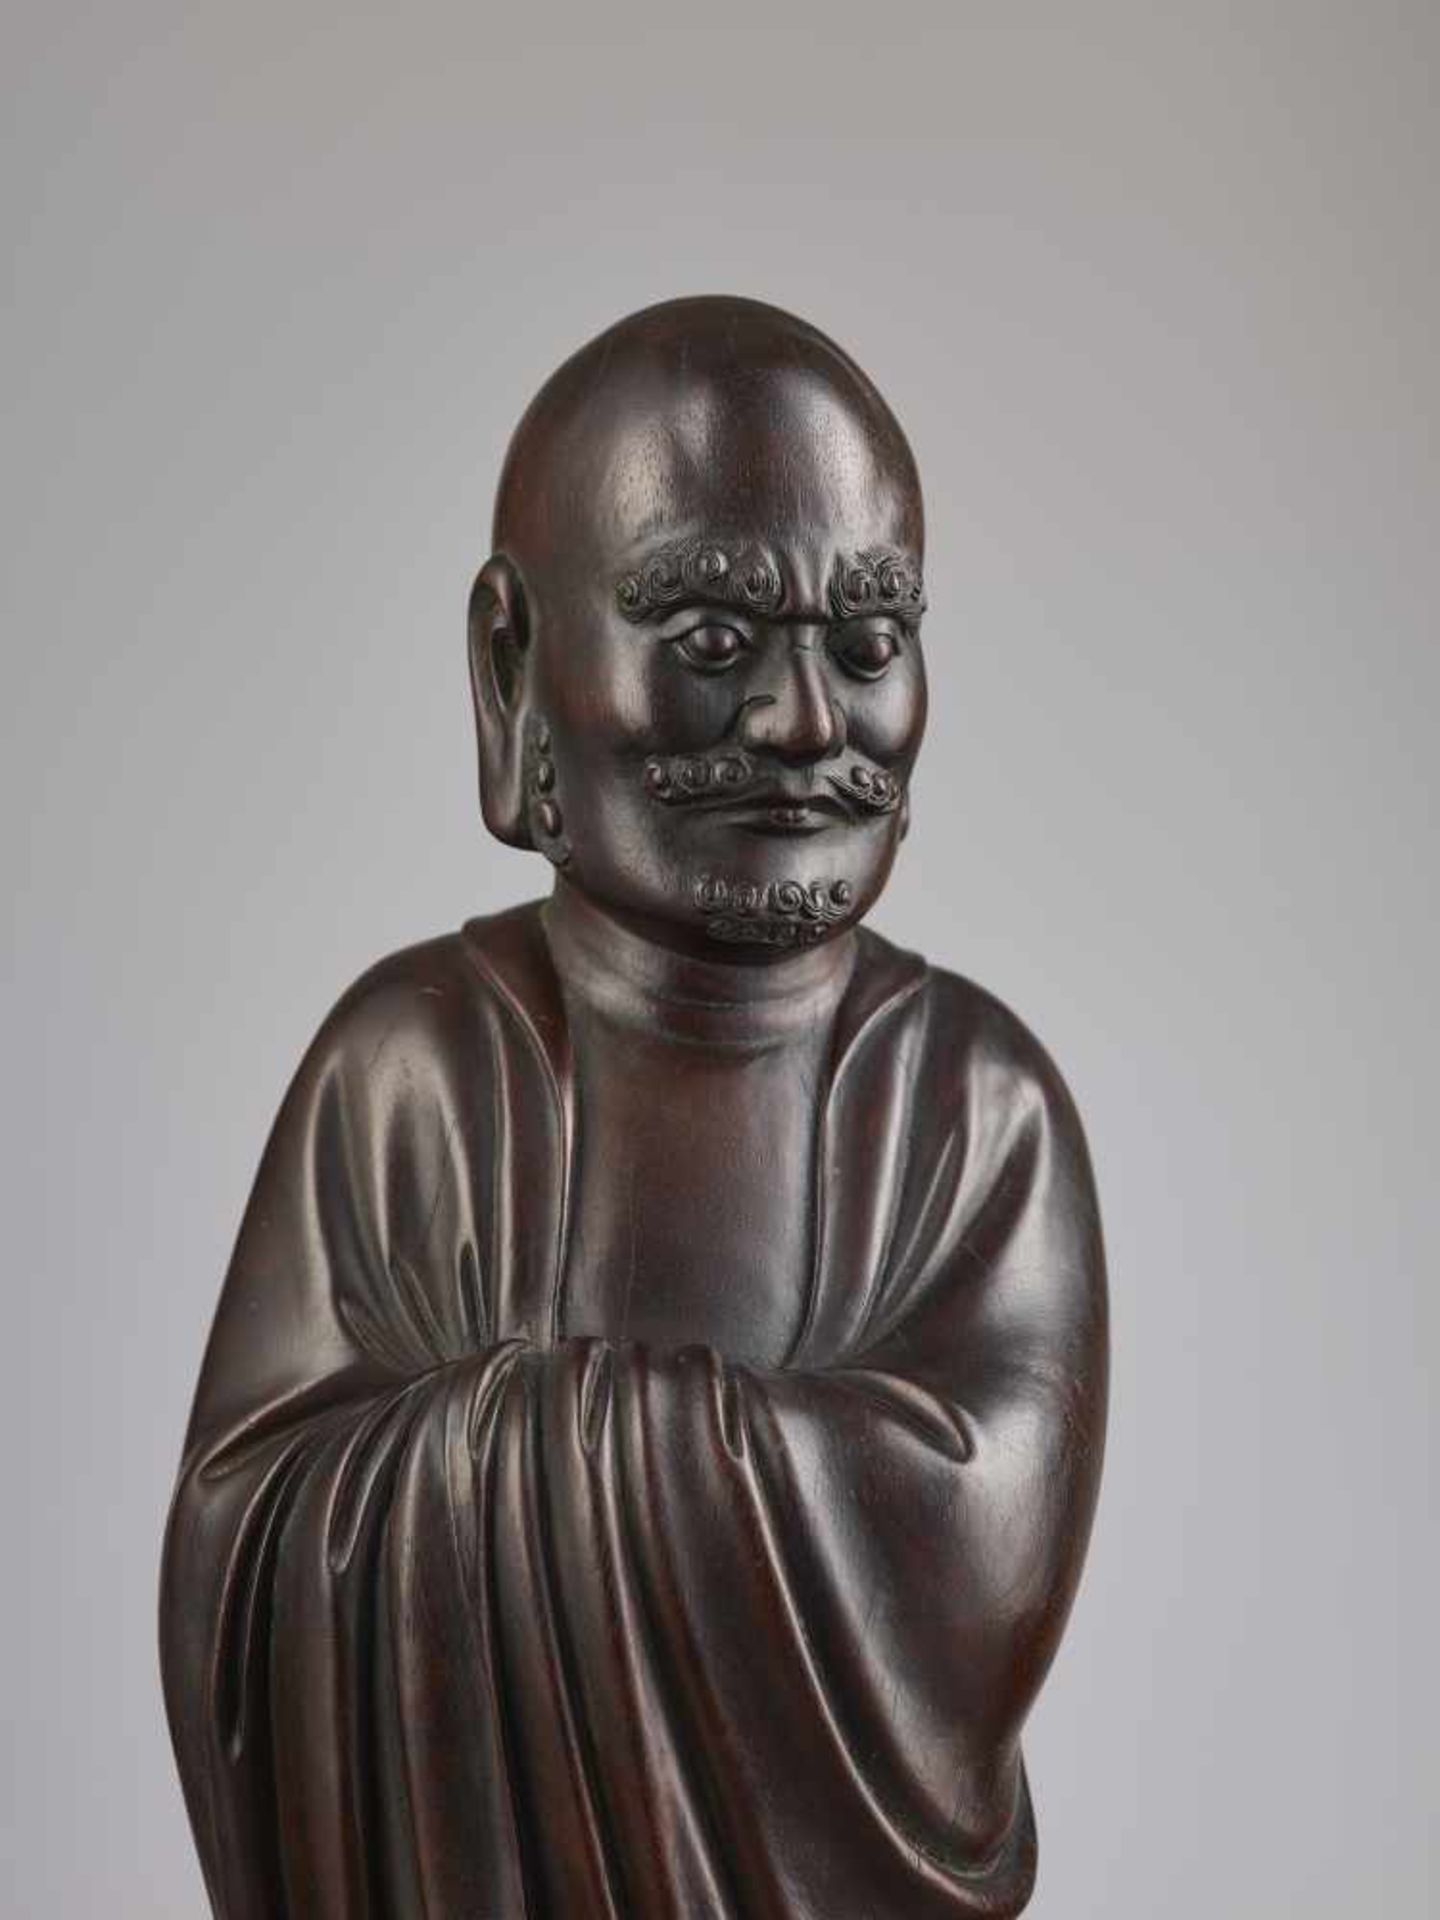 A ZITAN STATUE OF DAMO 18TH CENTURYChina, late 17th- mid 18th century. The large statue is - Image 9 of 10